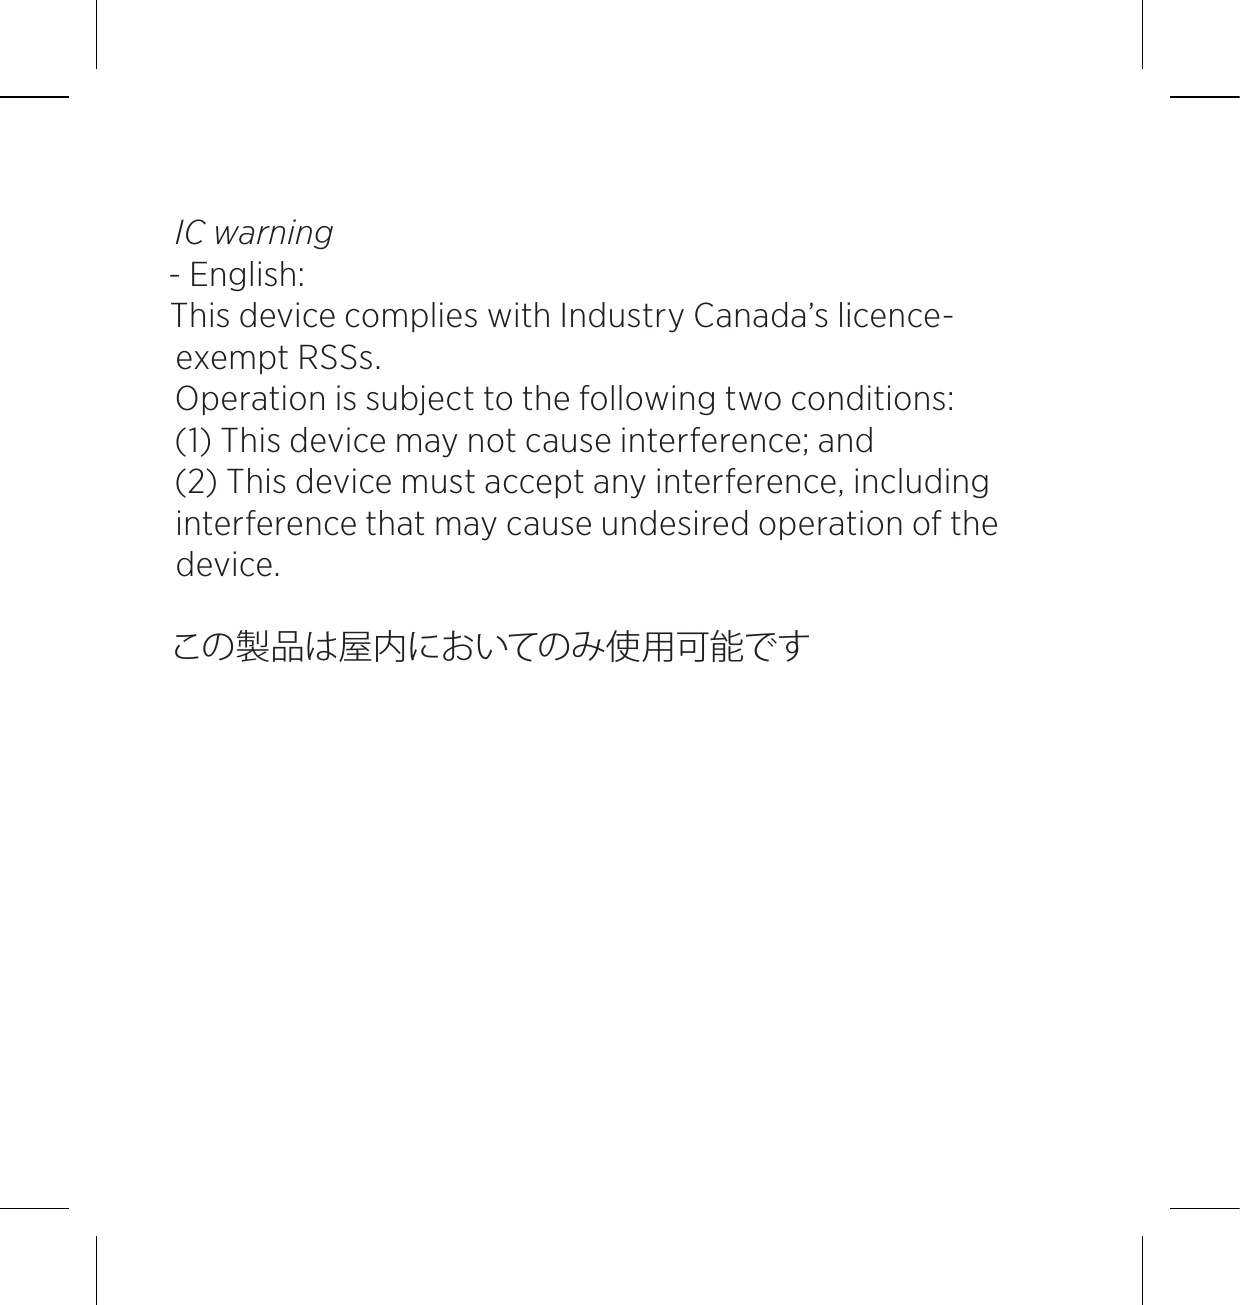 IC warning - English: This device complies with Industry Canada’s licence-exempt RSSs. Operation is subject to the following two conditions: (1) This device may not cause interference; and (2) This device must accept any interference, including interference that may cause undesired operation of the device. この製品は屋内においてのみ使用可能です